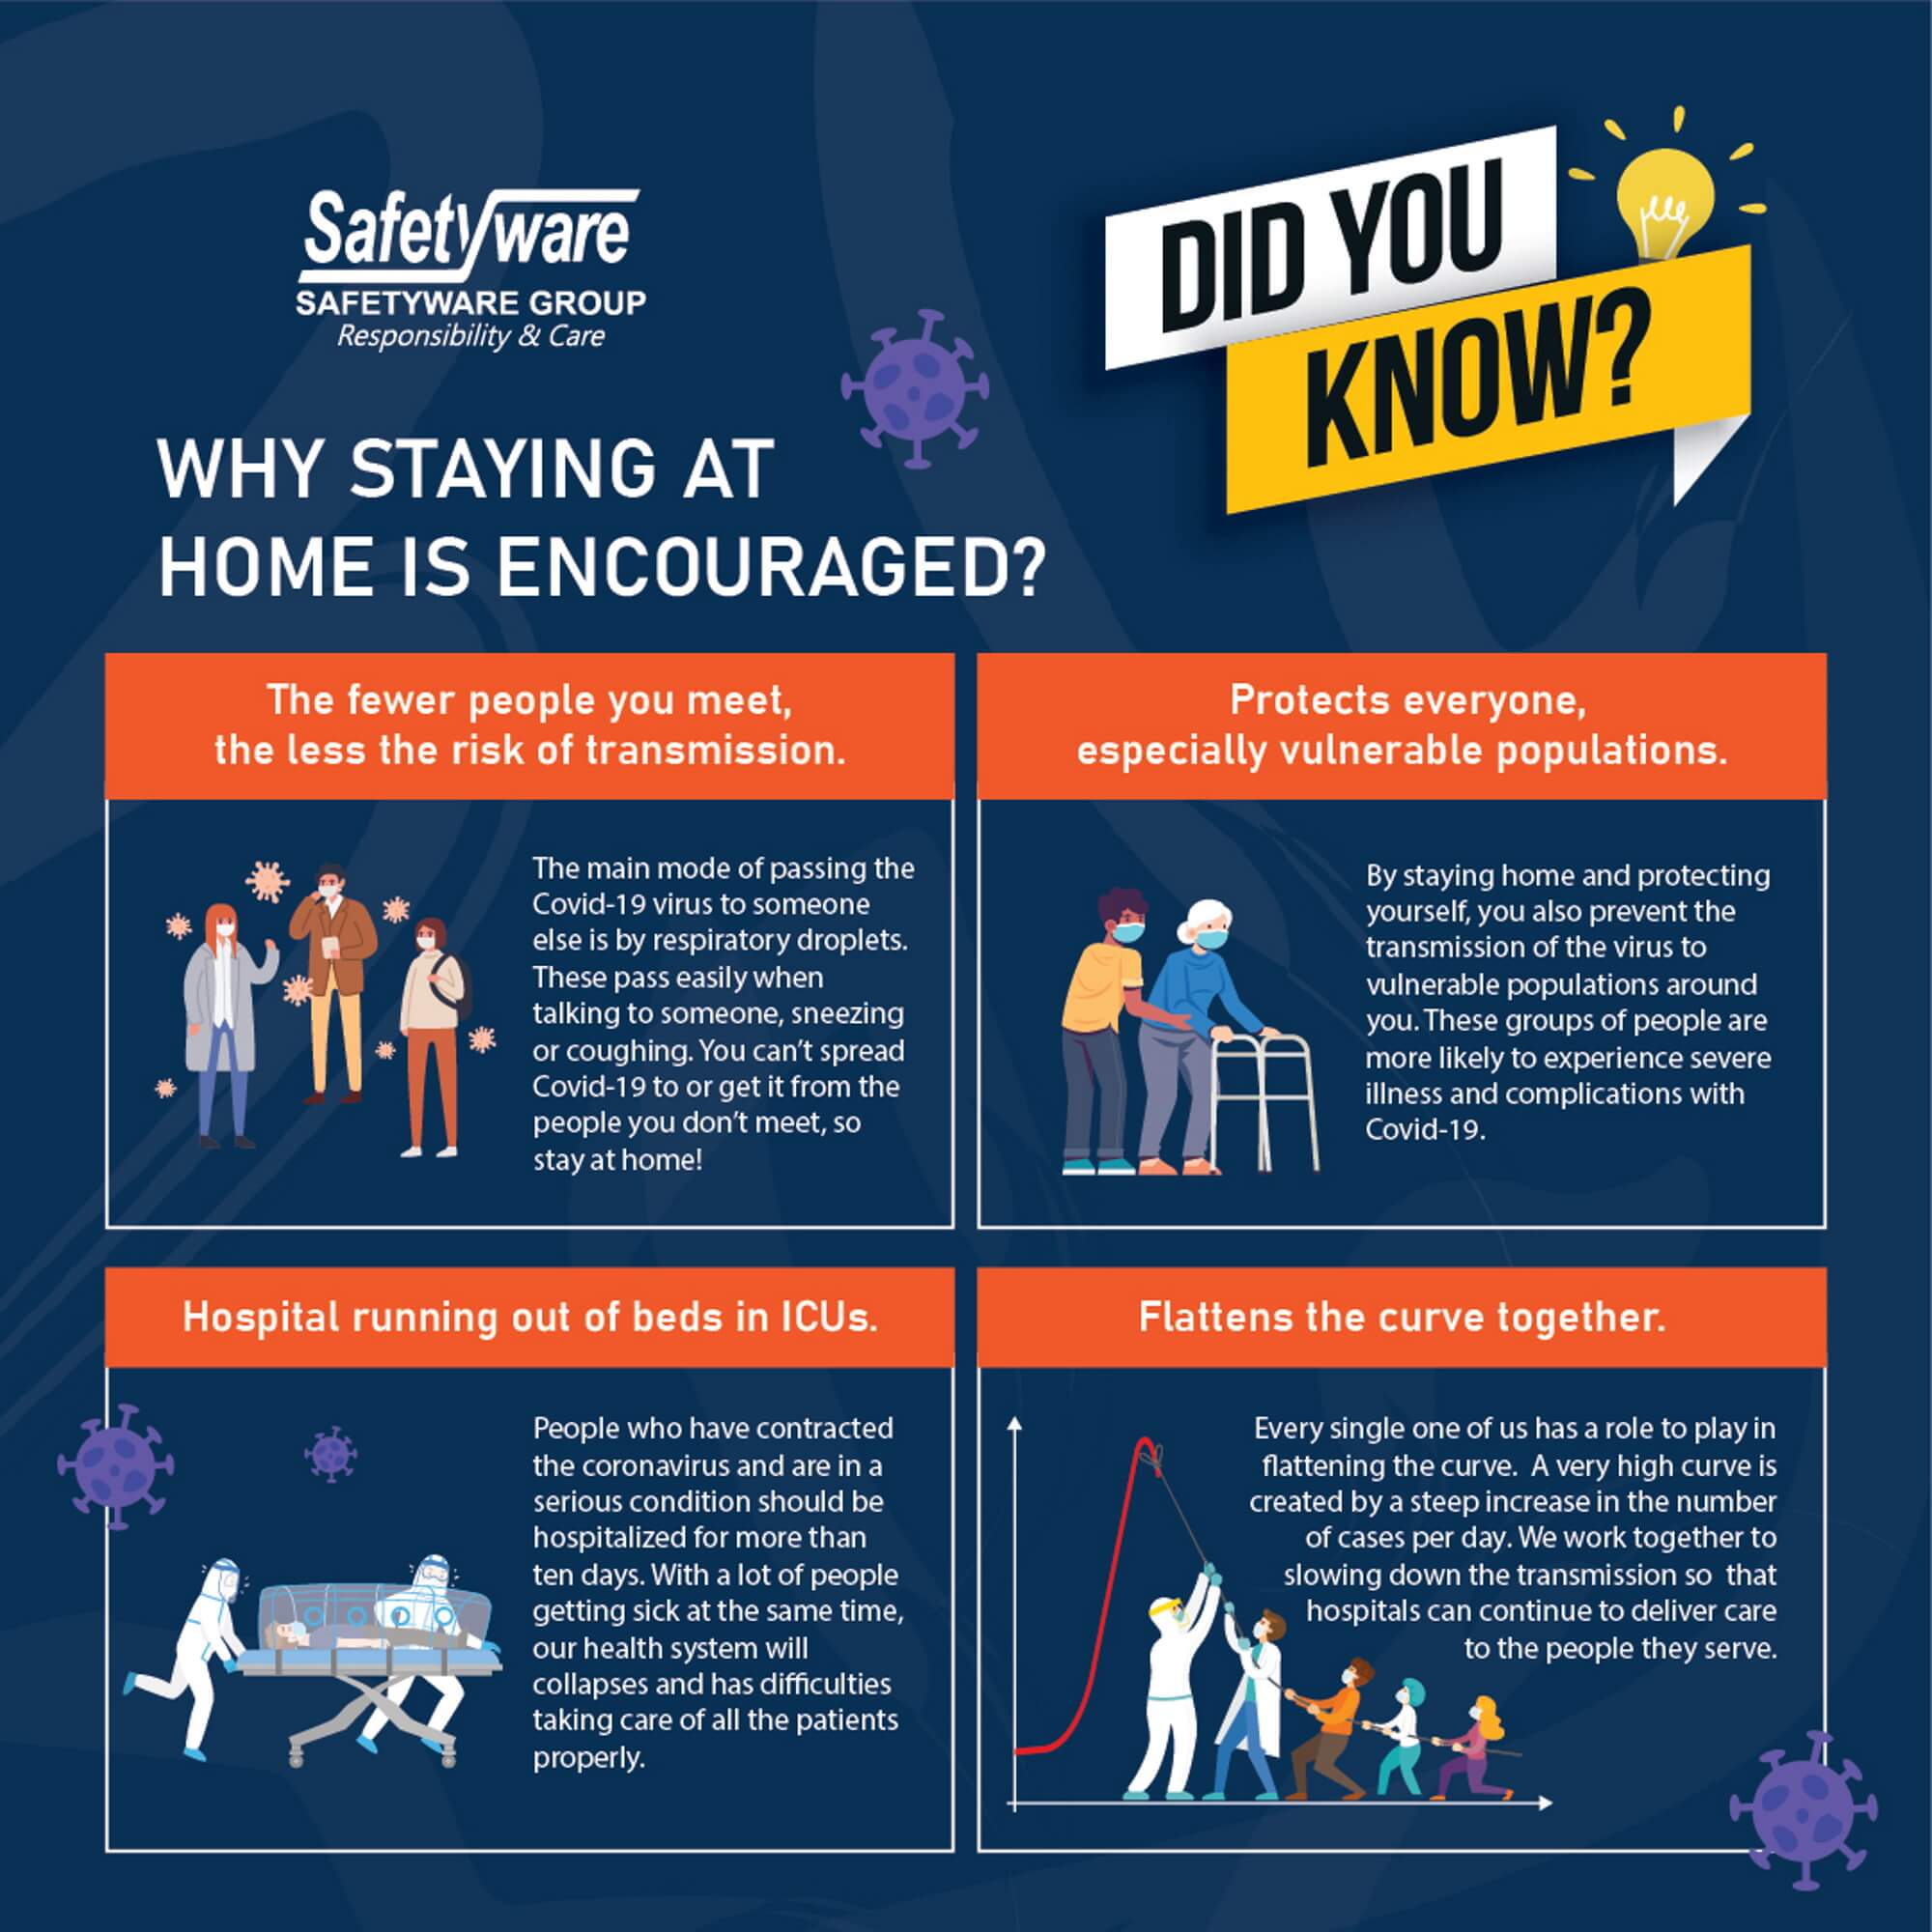 Why Staying at Home is Encouranged